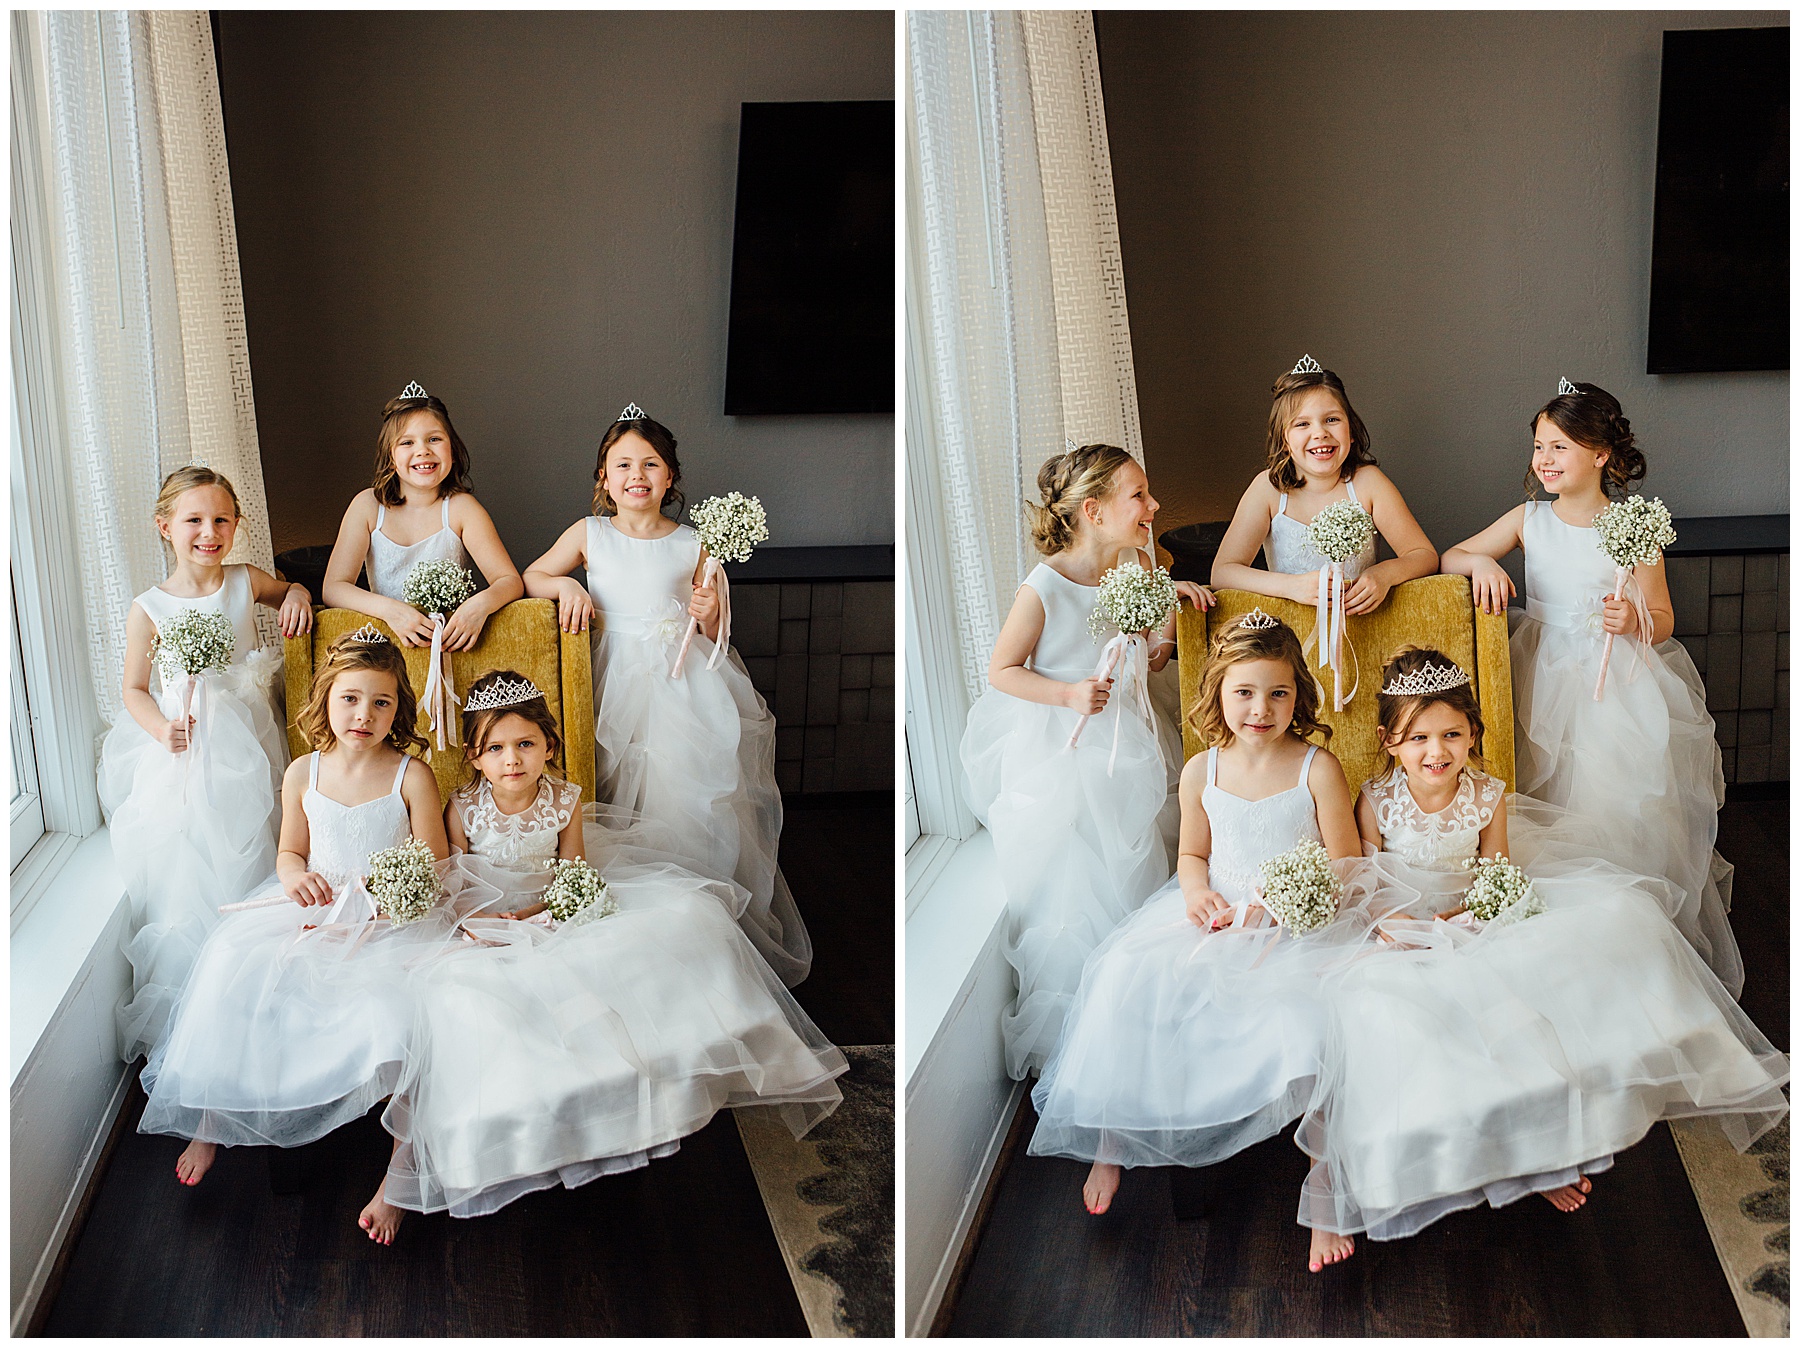 Group picture of flower girls